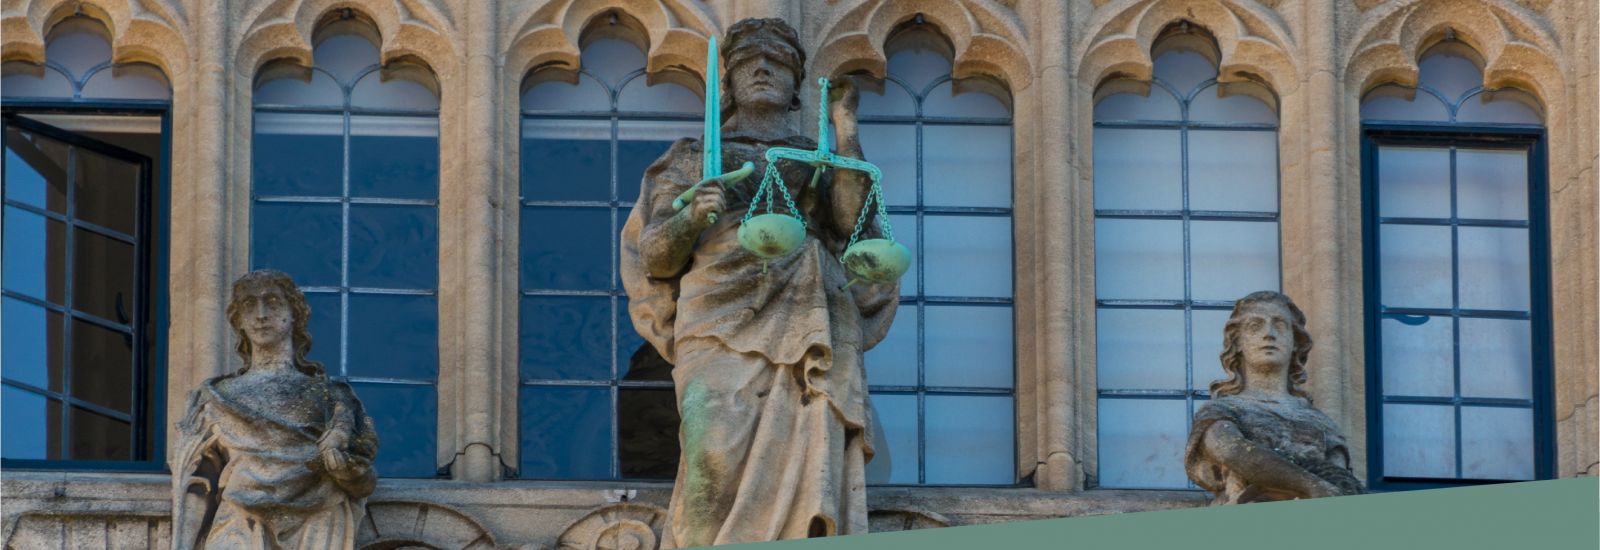 Detail of the façade of the Bodleian Library in Oxford showing Justice with her scales and blindfold.